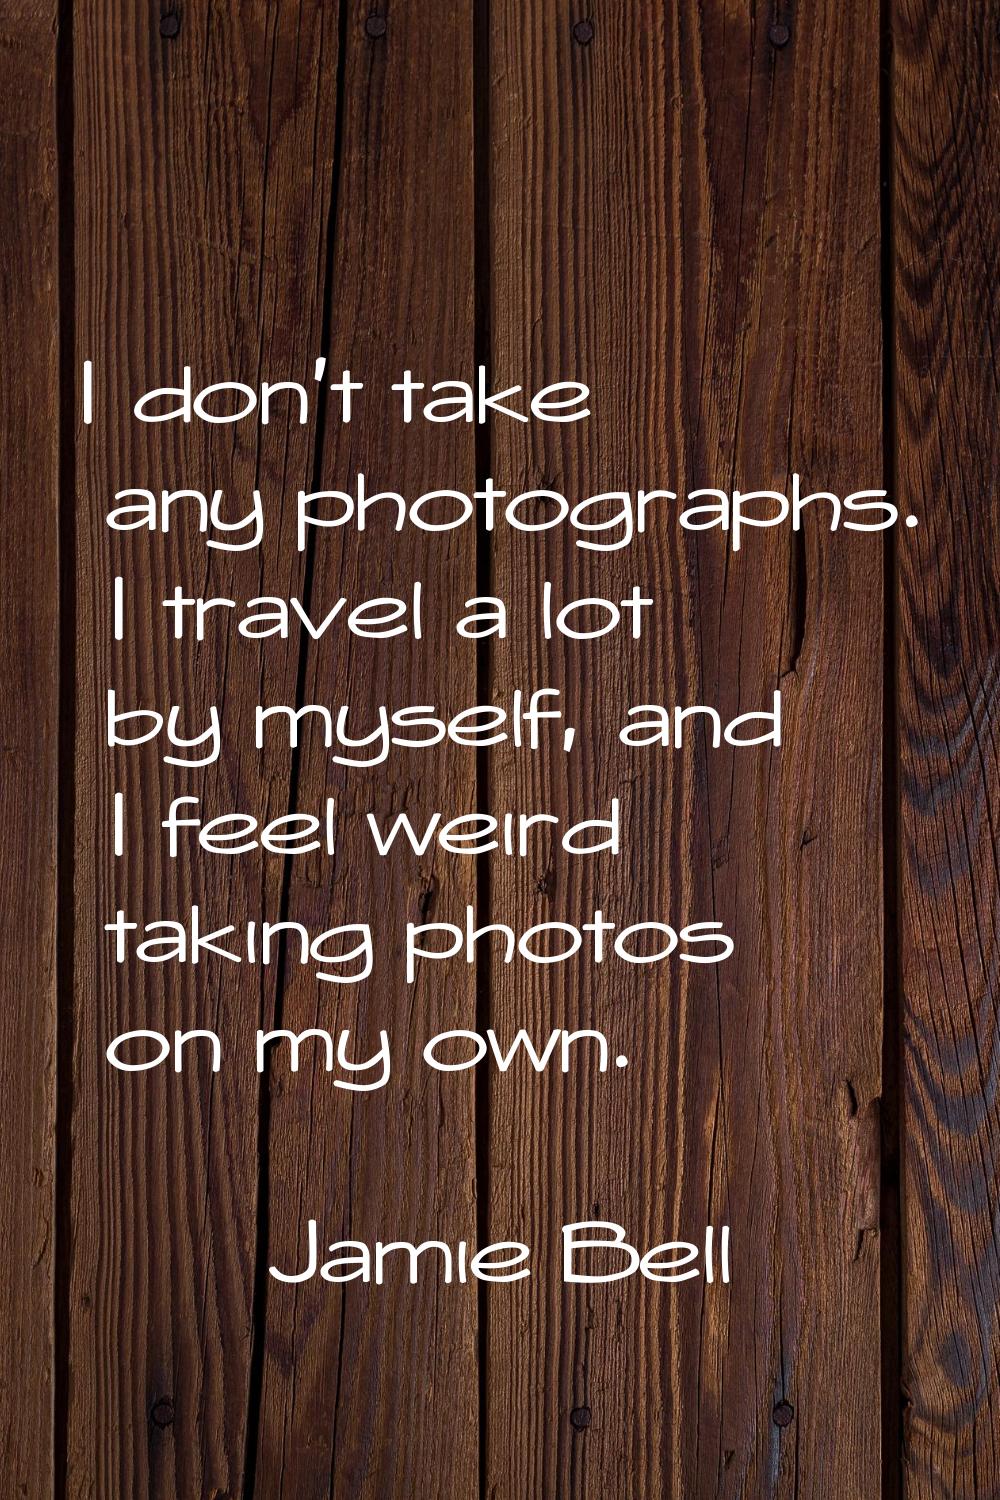 I don't take any photographs. I travel a lot by myself, and I feel weird taking photos on my own.